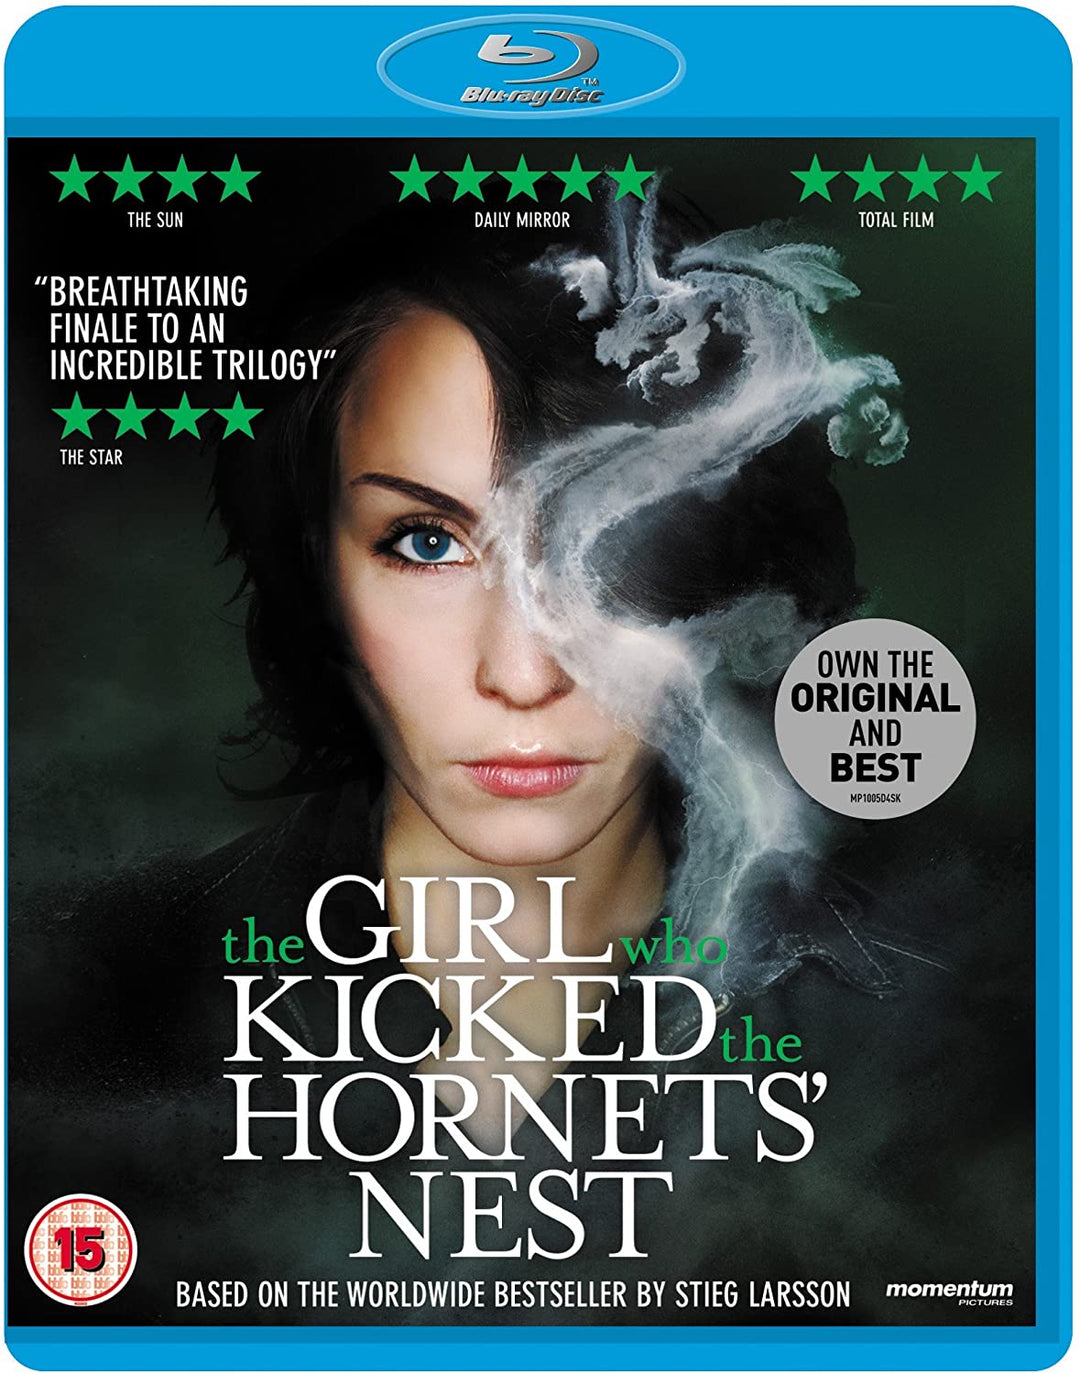 The Girl Who Kicked the Hornets' Nest [2010]